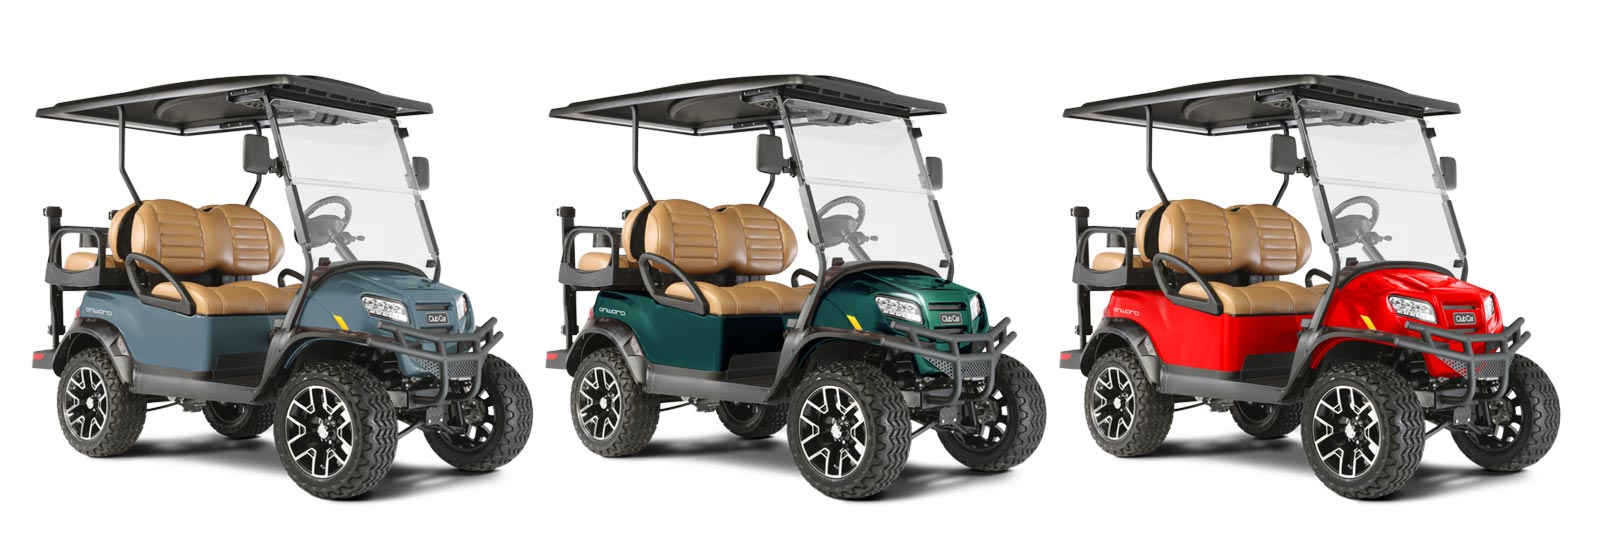 Four passenger lifted golf carts in grey, green, and red